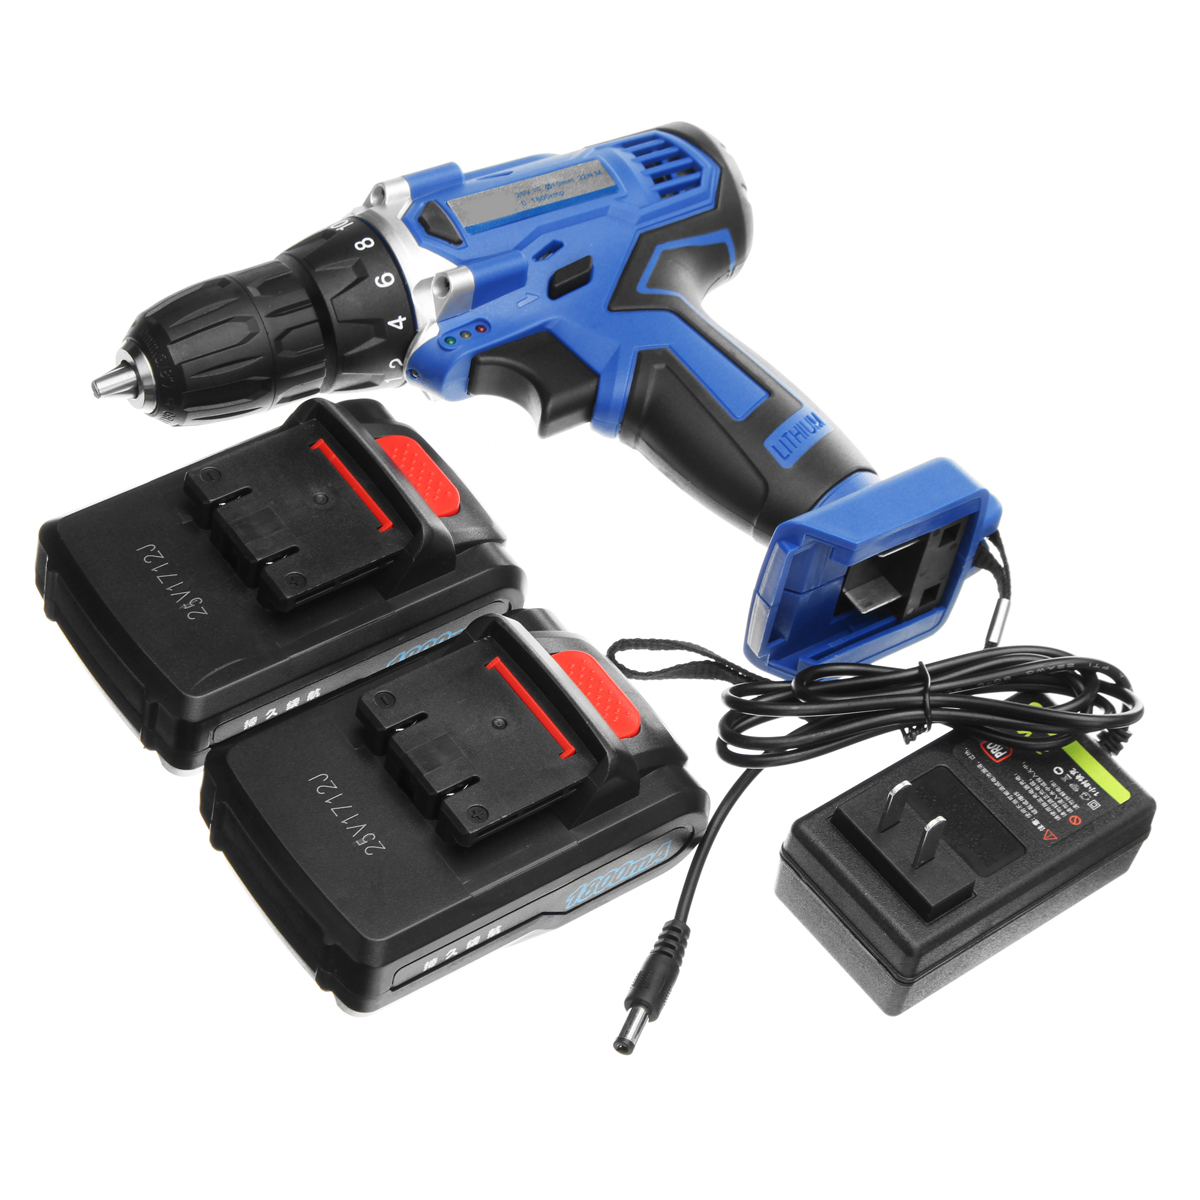 25V-Rechargeable-Cordless-Drill-Lithium-Ion-Power-Screwdriver-With-2-Batteries-1-Charger-1280262-8